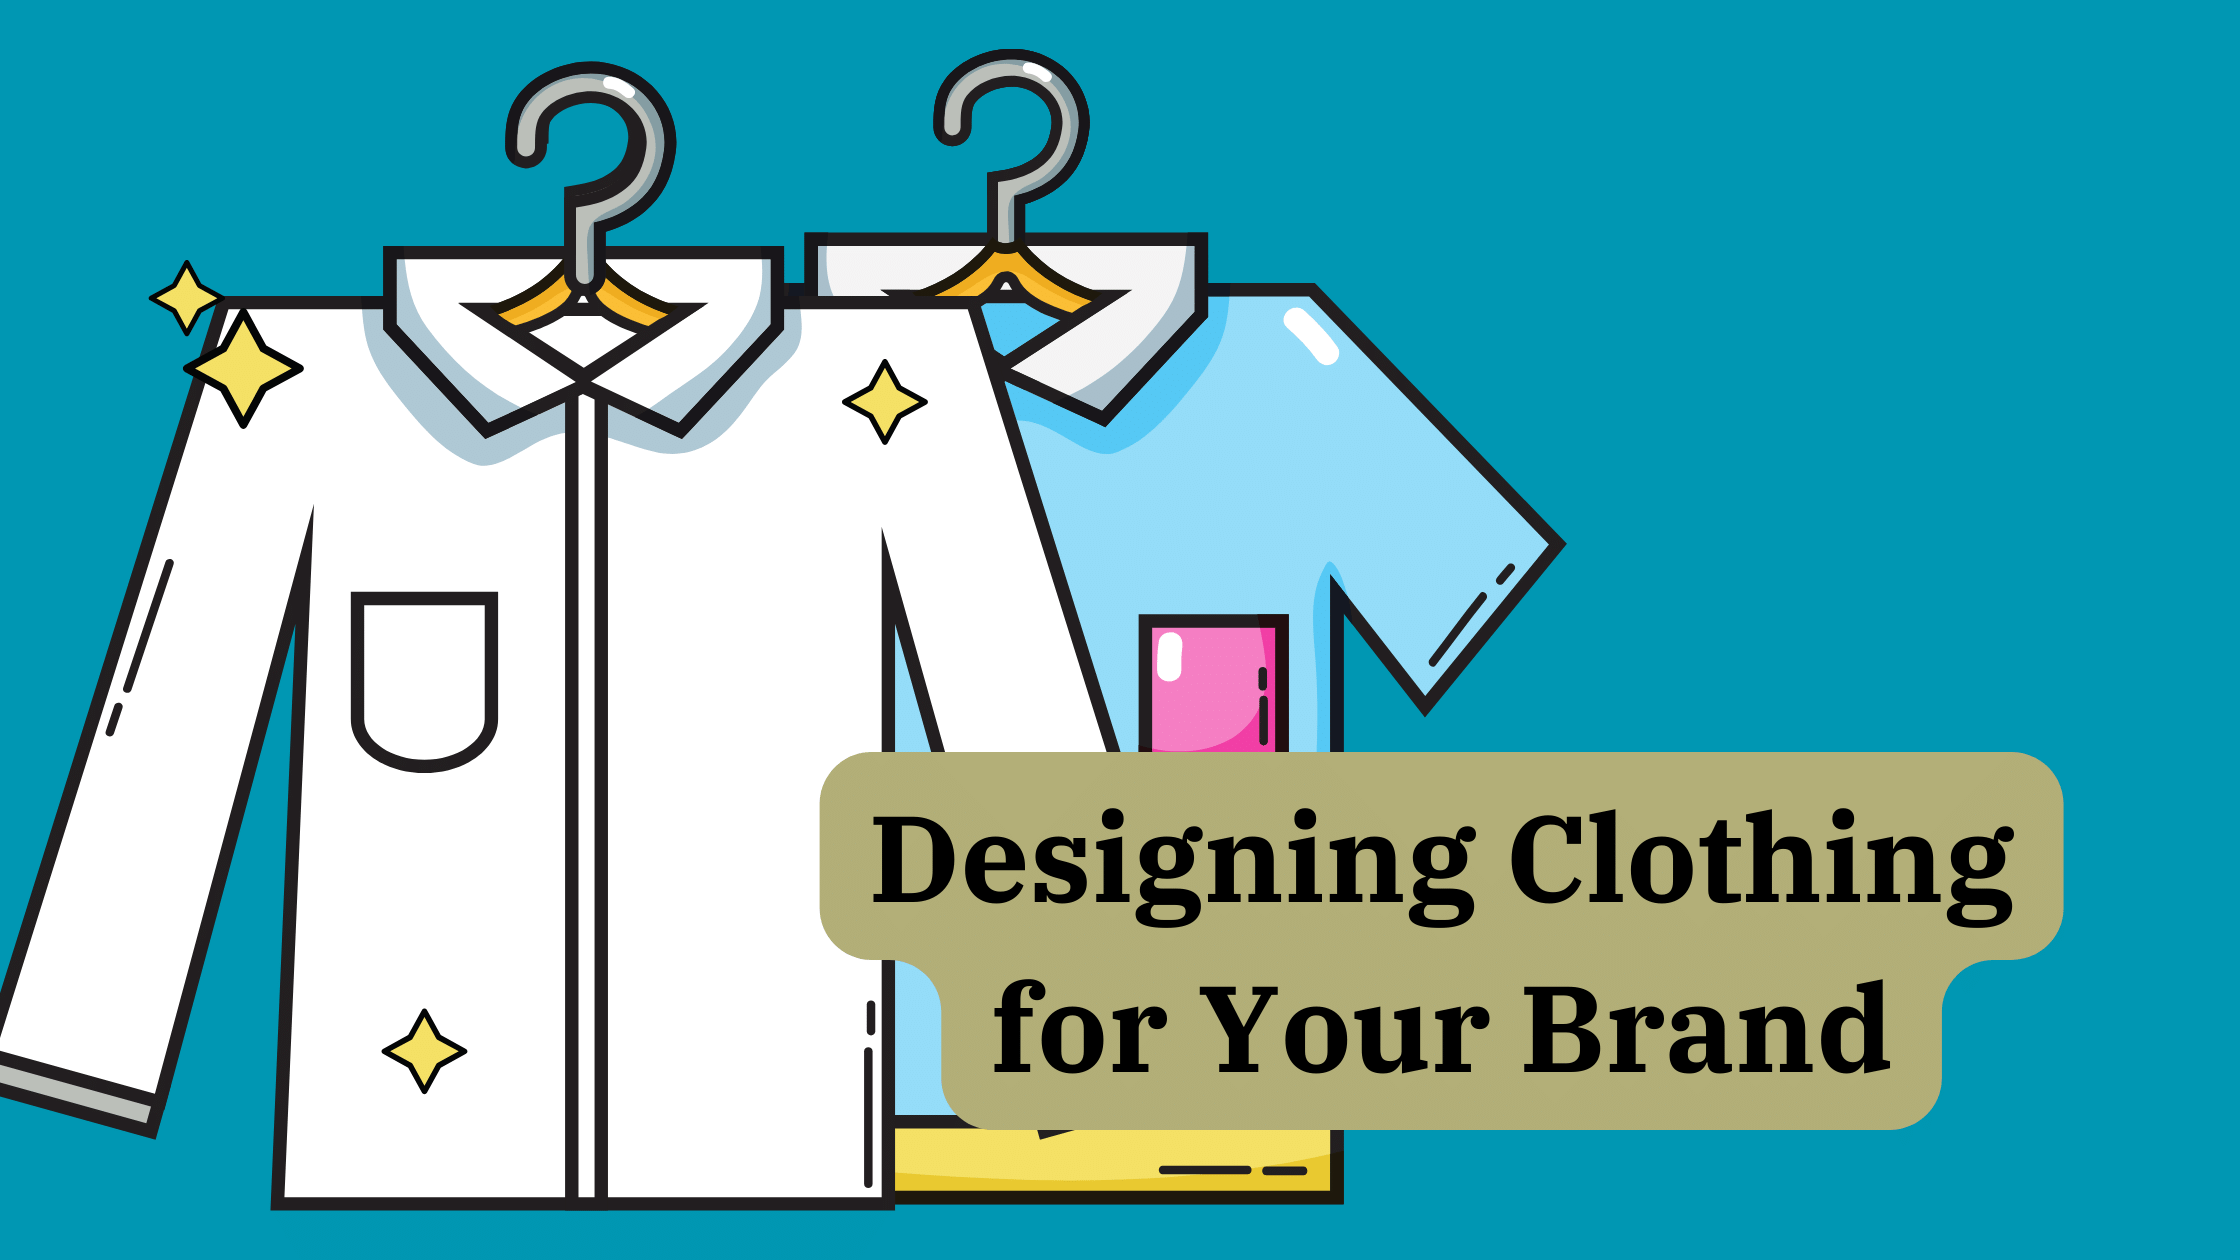 Journey of Designing Clothing for Your Brand